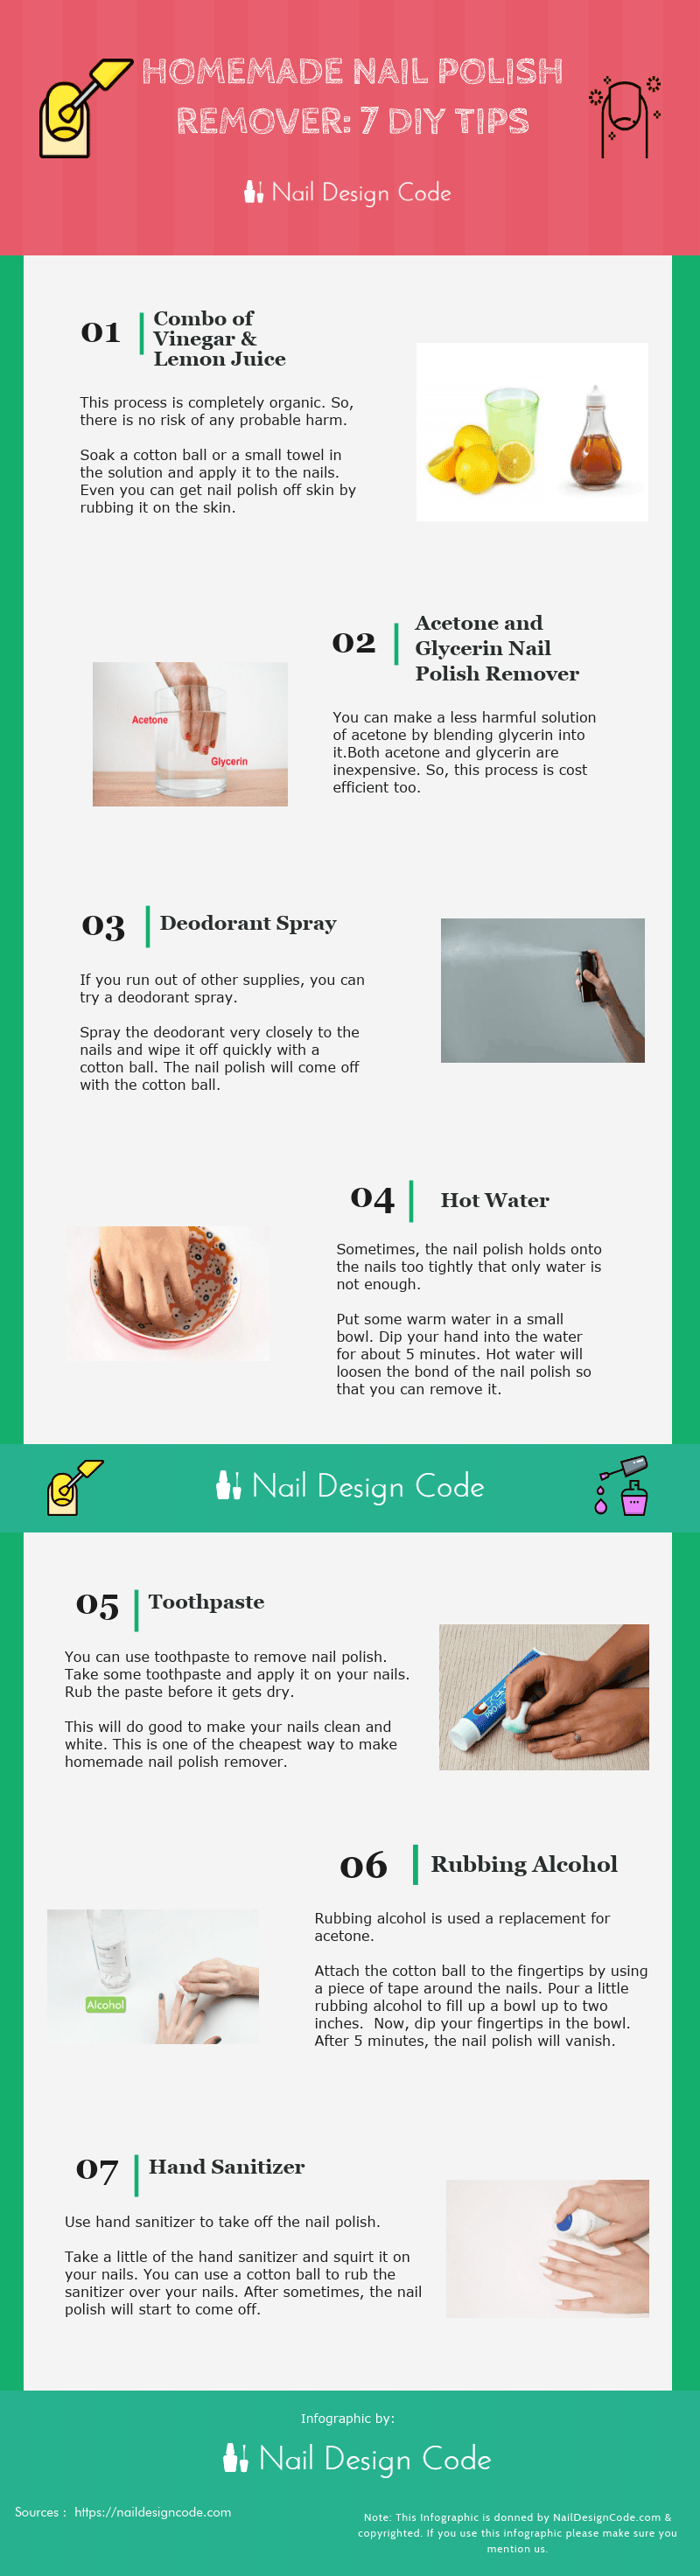 infographic on how to make nail polish remover at home